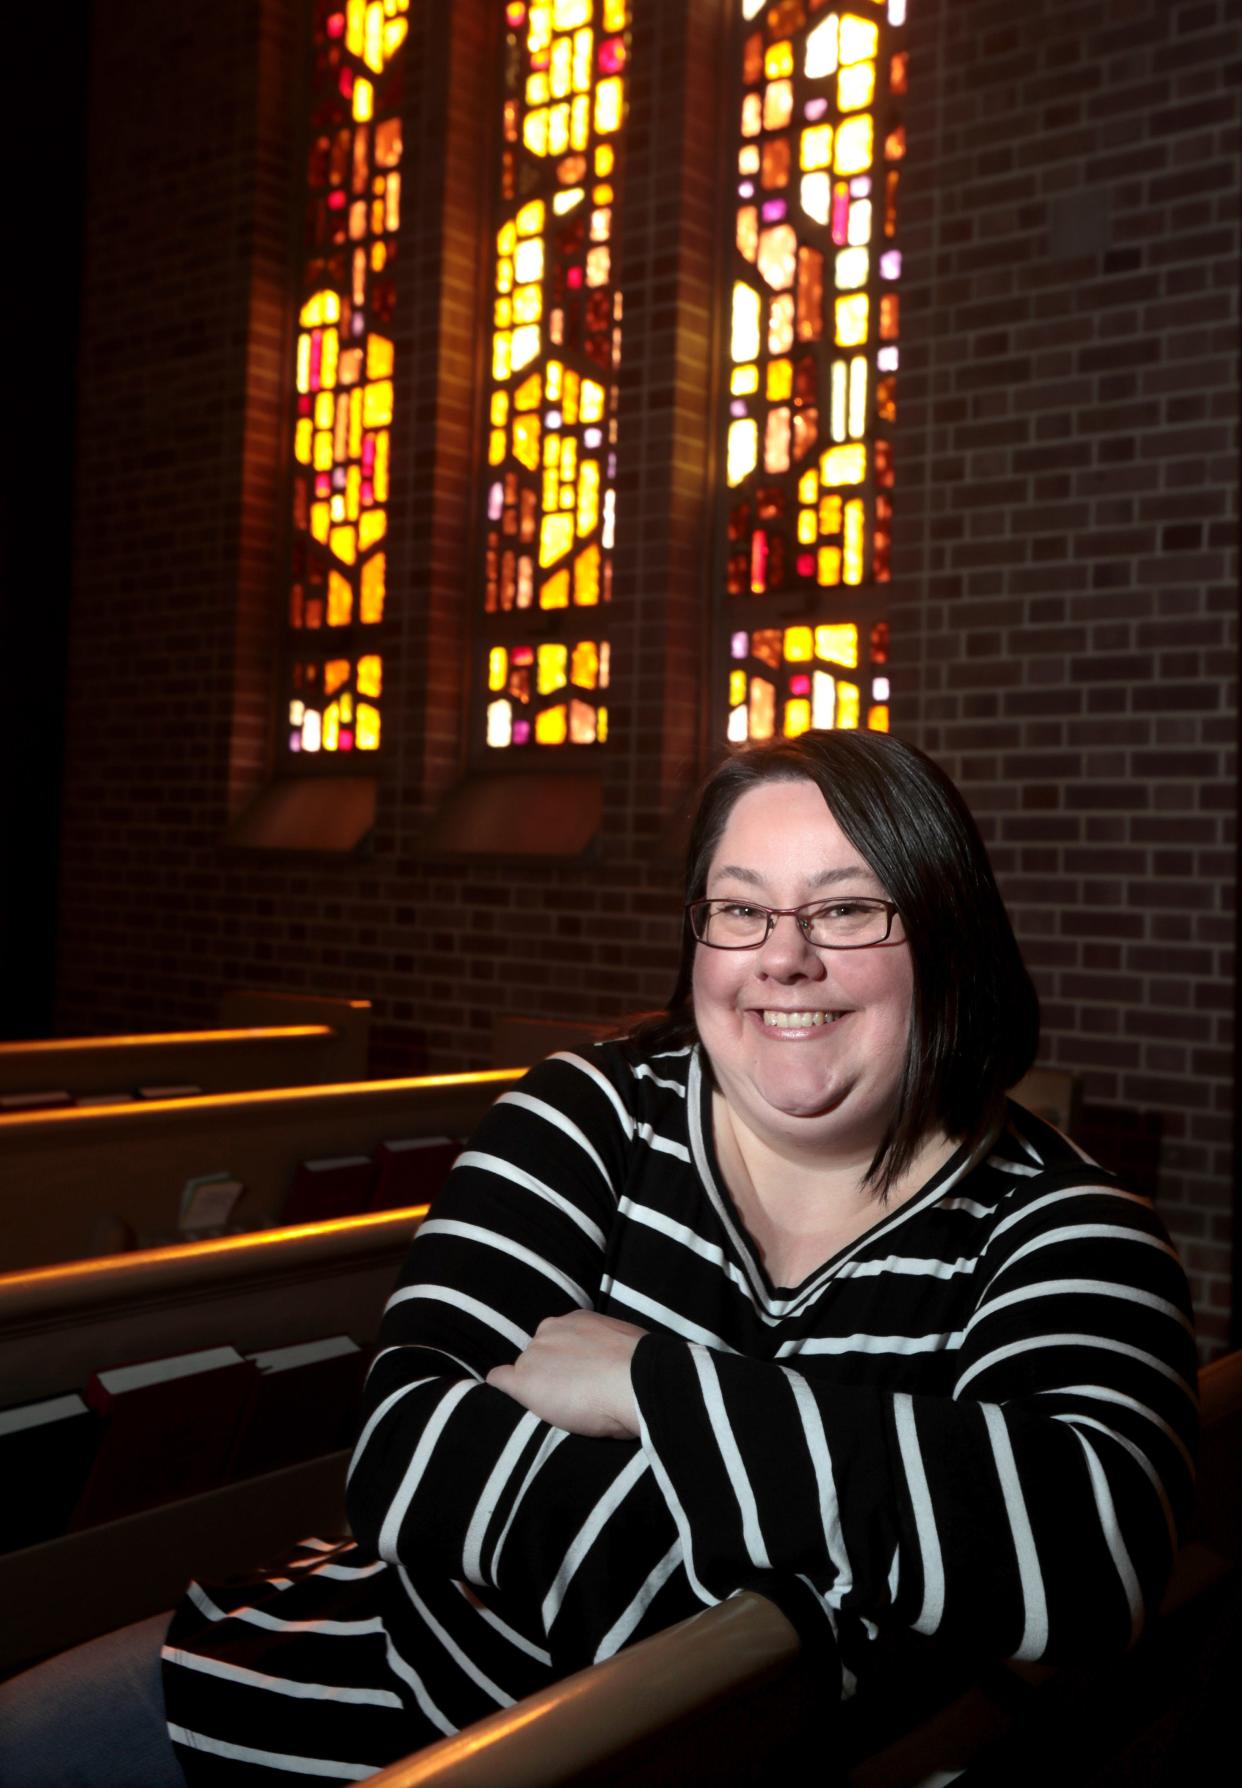 Sara Koons is the new pastor at First Christian Church in Massillon. She replaces Steven Gower, who accepted a ministry in North Olmsted in early 2020.